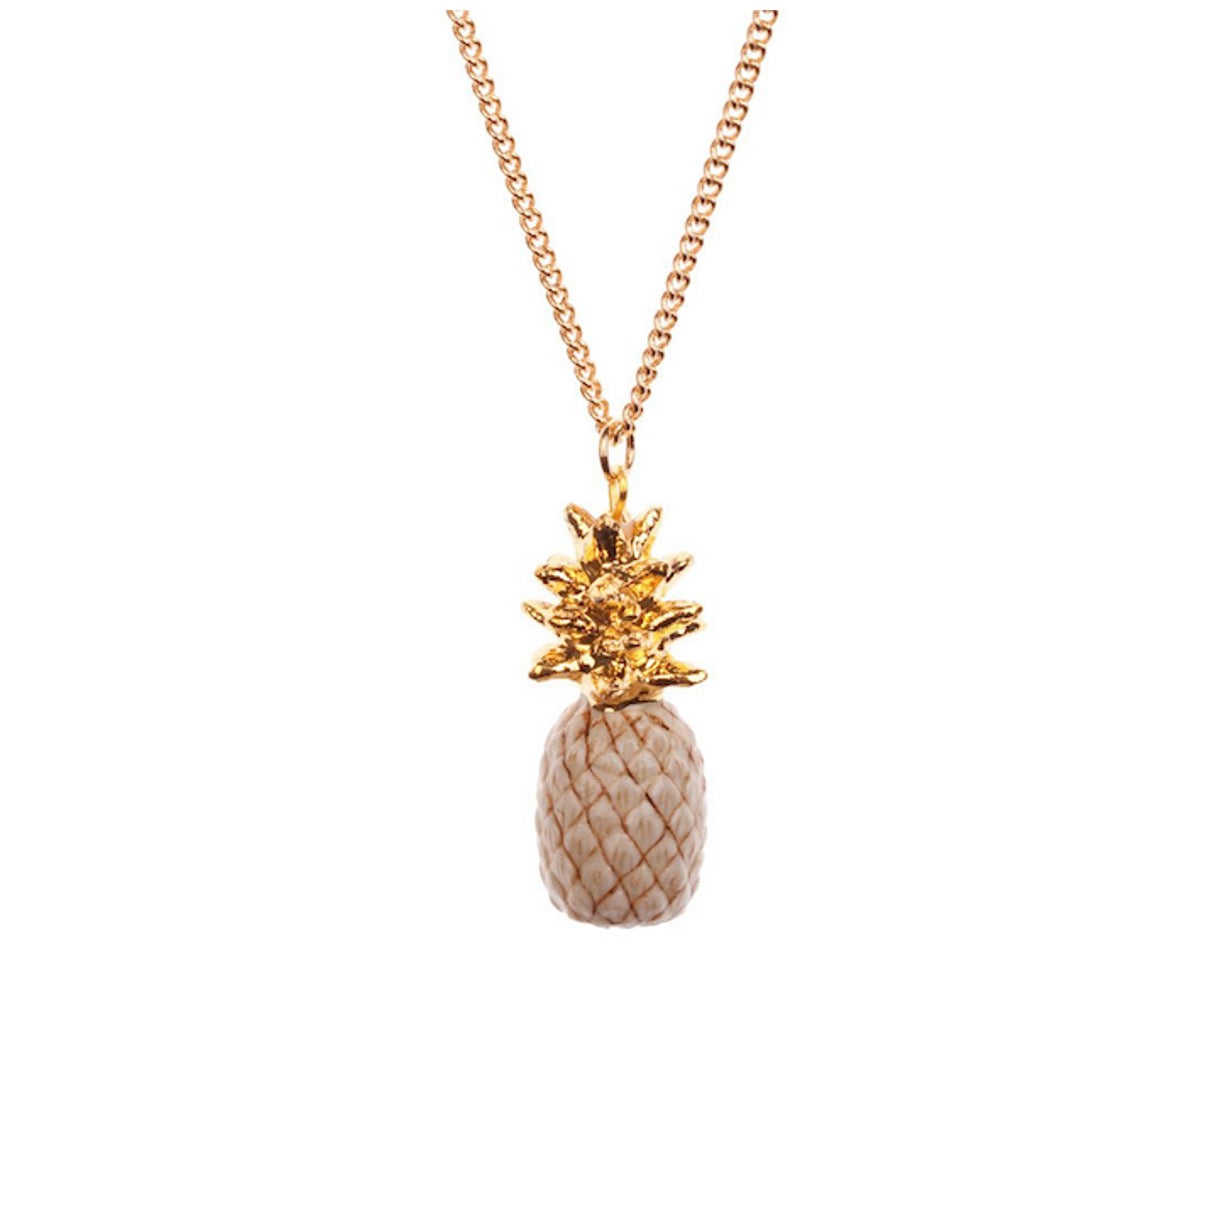 Beige Pineapple Necklace with Gold Leaves